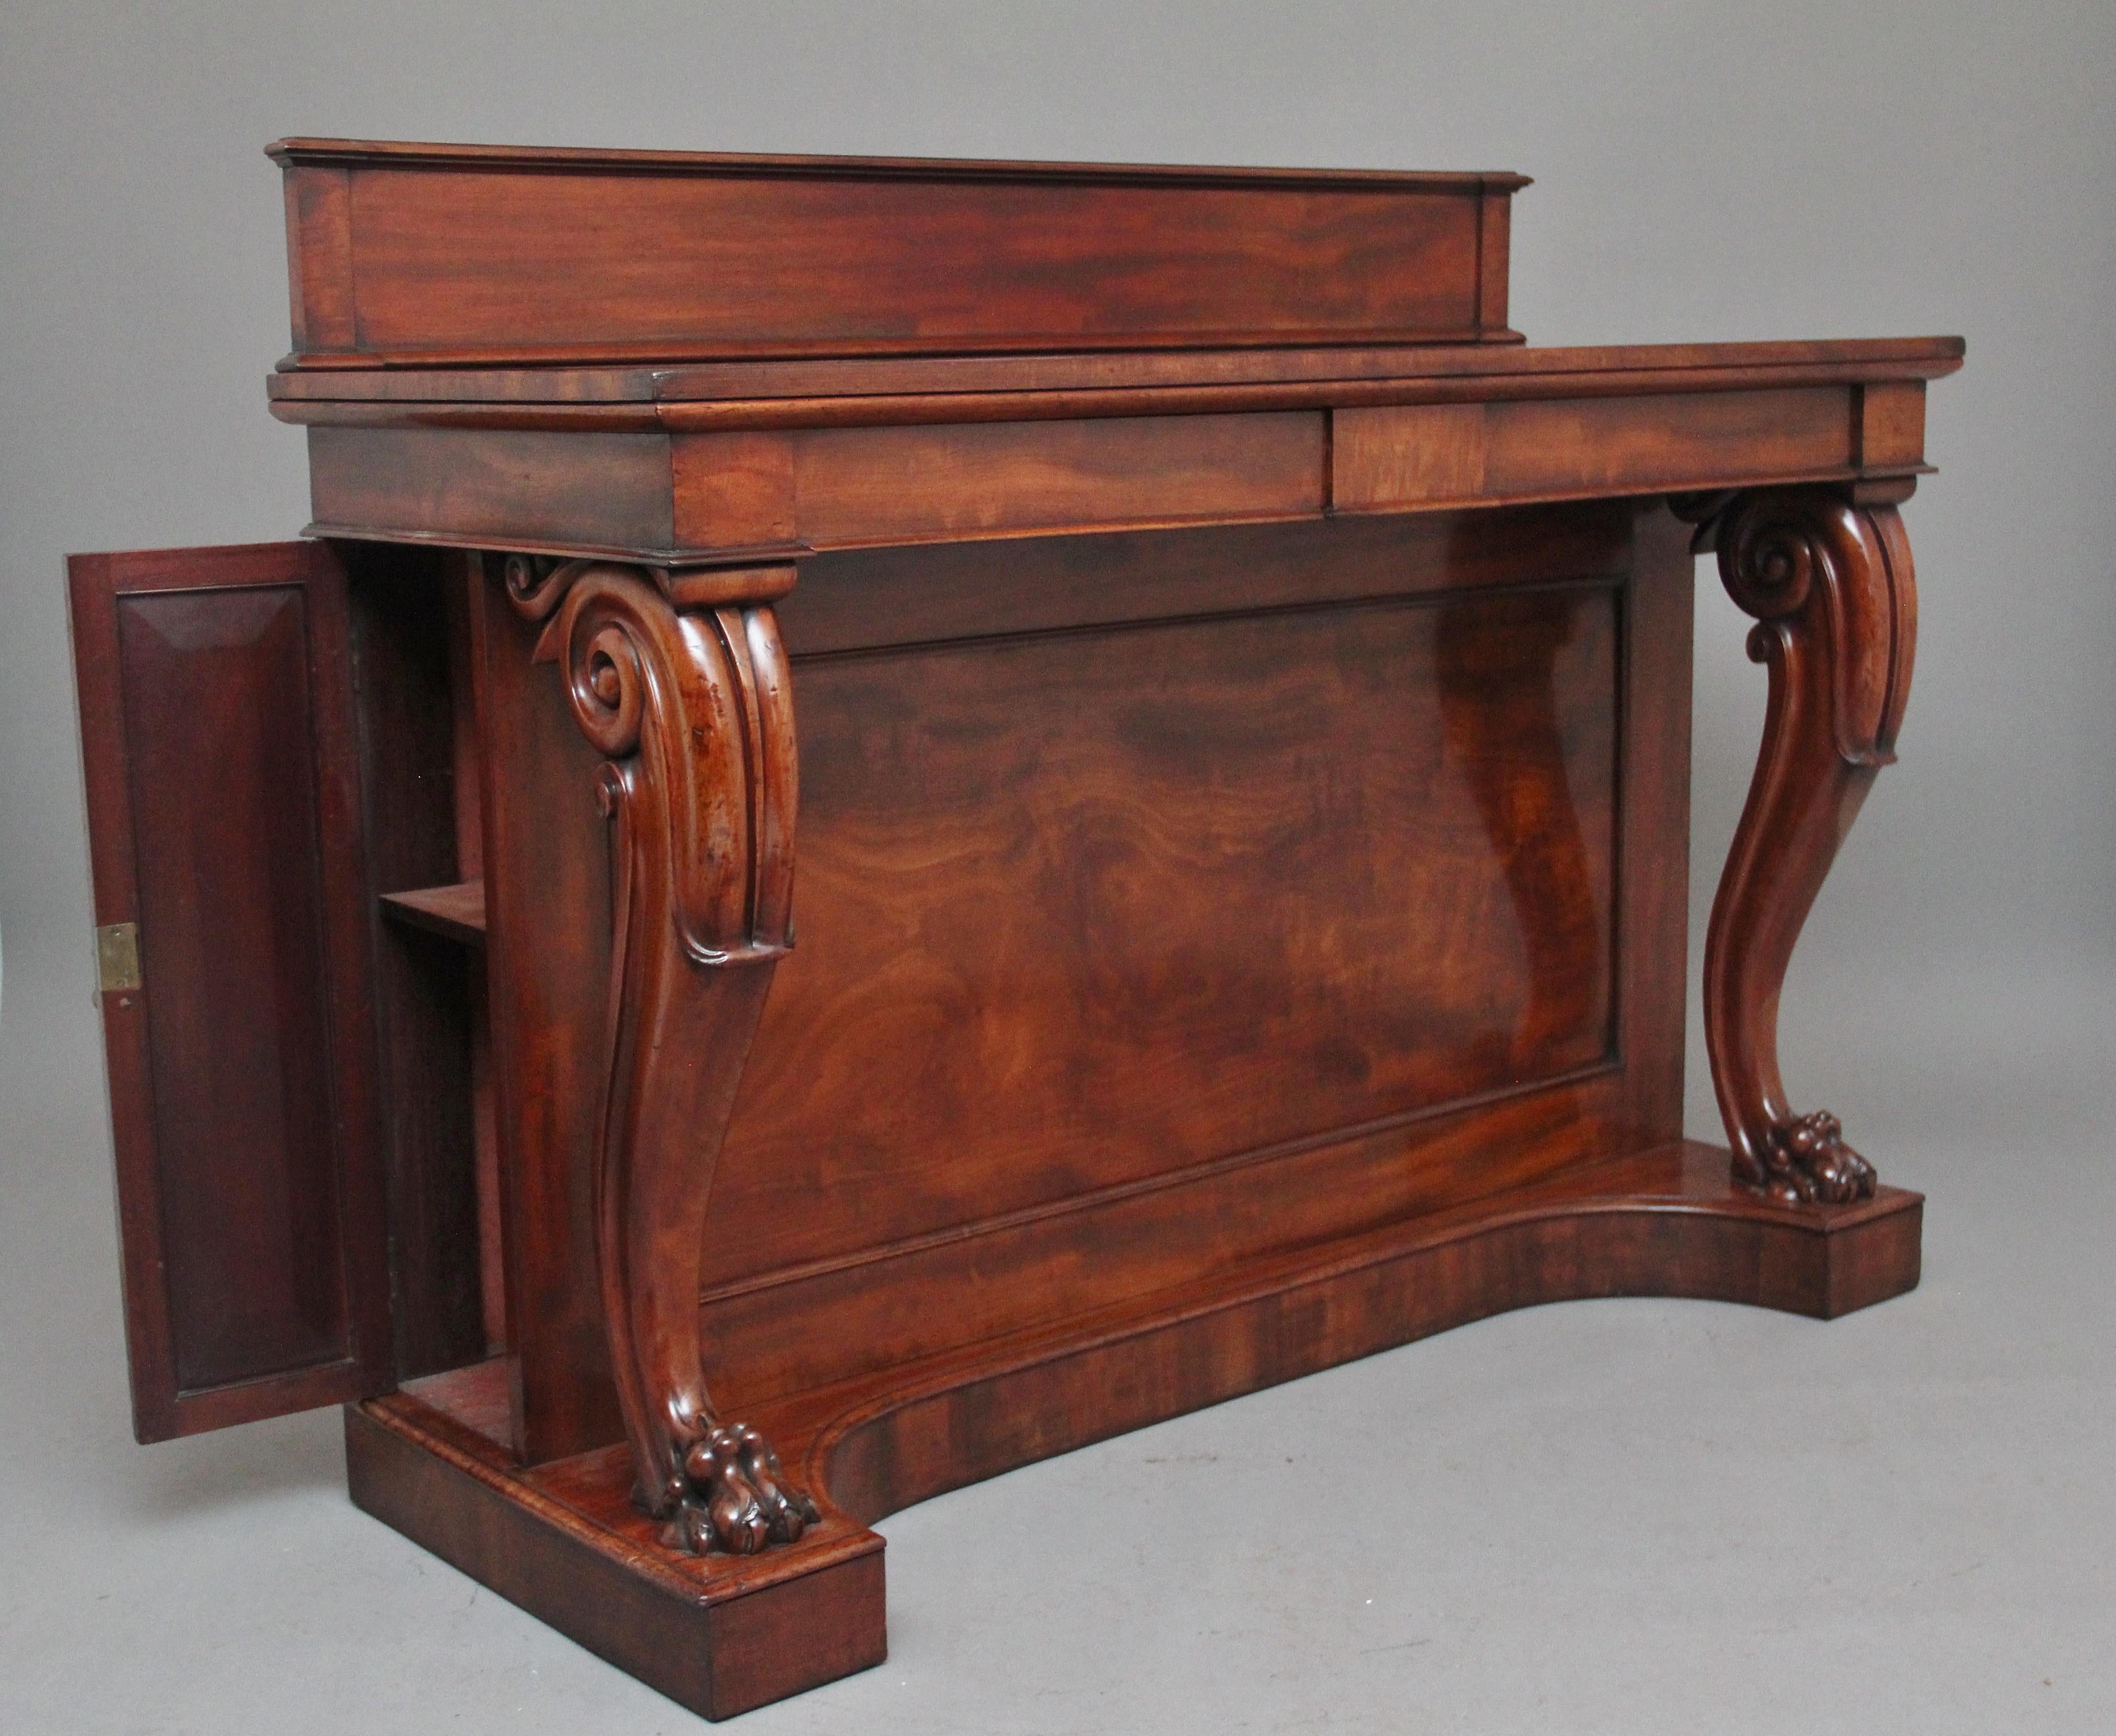 A lovely quality mid 19th Century mahogany serving / console table, having a nice deep figured top with a moulded edge gallery, the frieze below having two mahogany lined drawers supported on bold carved cabriole legs with scroll decoration